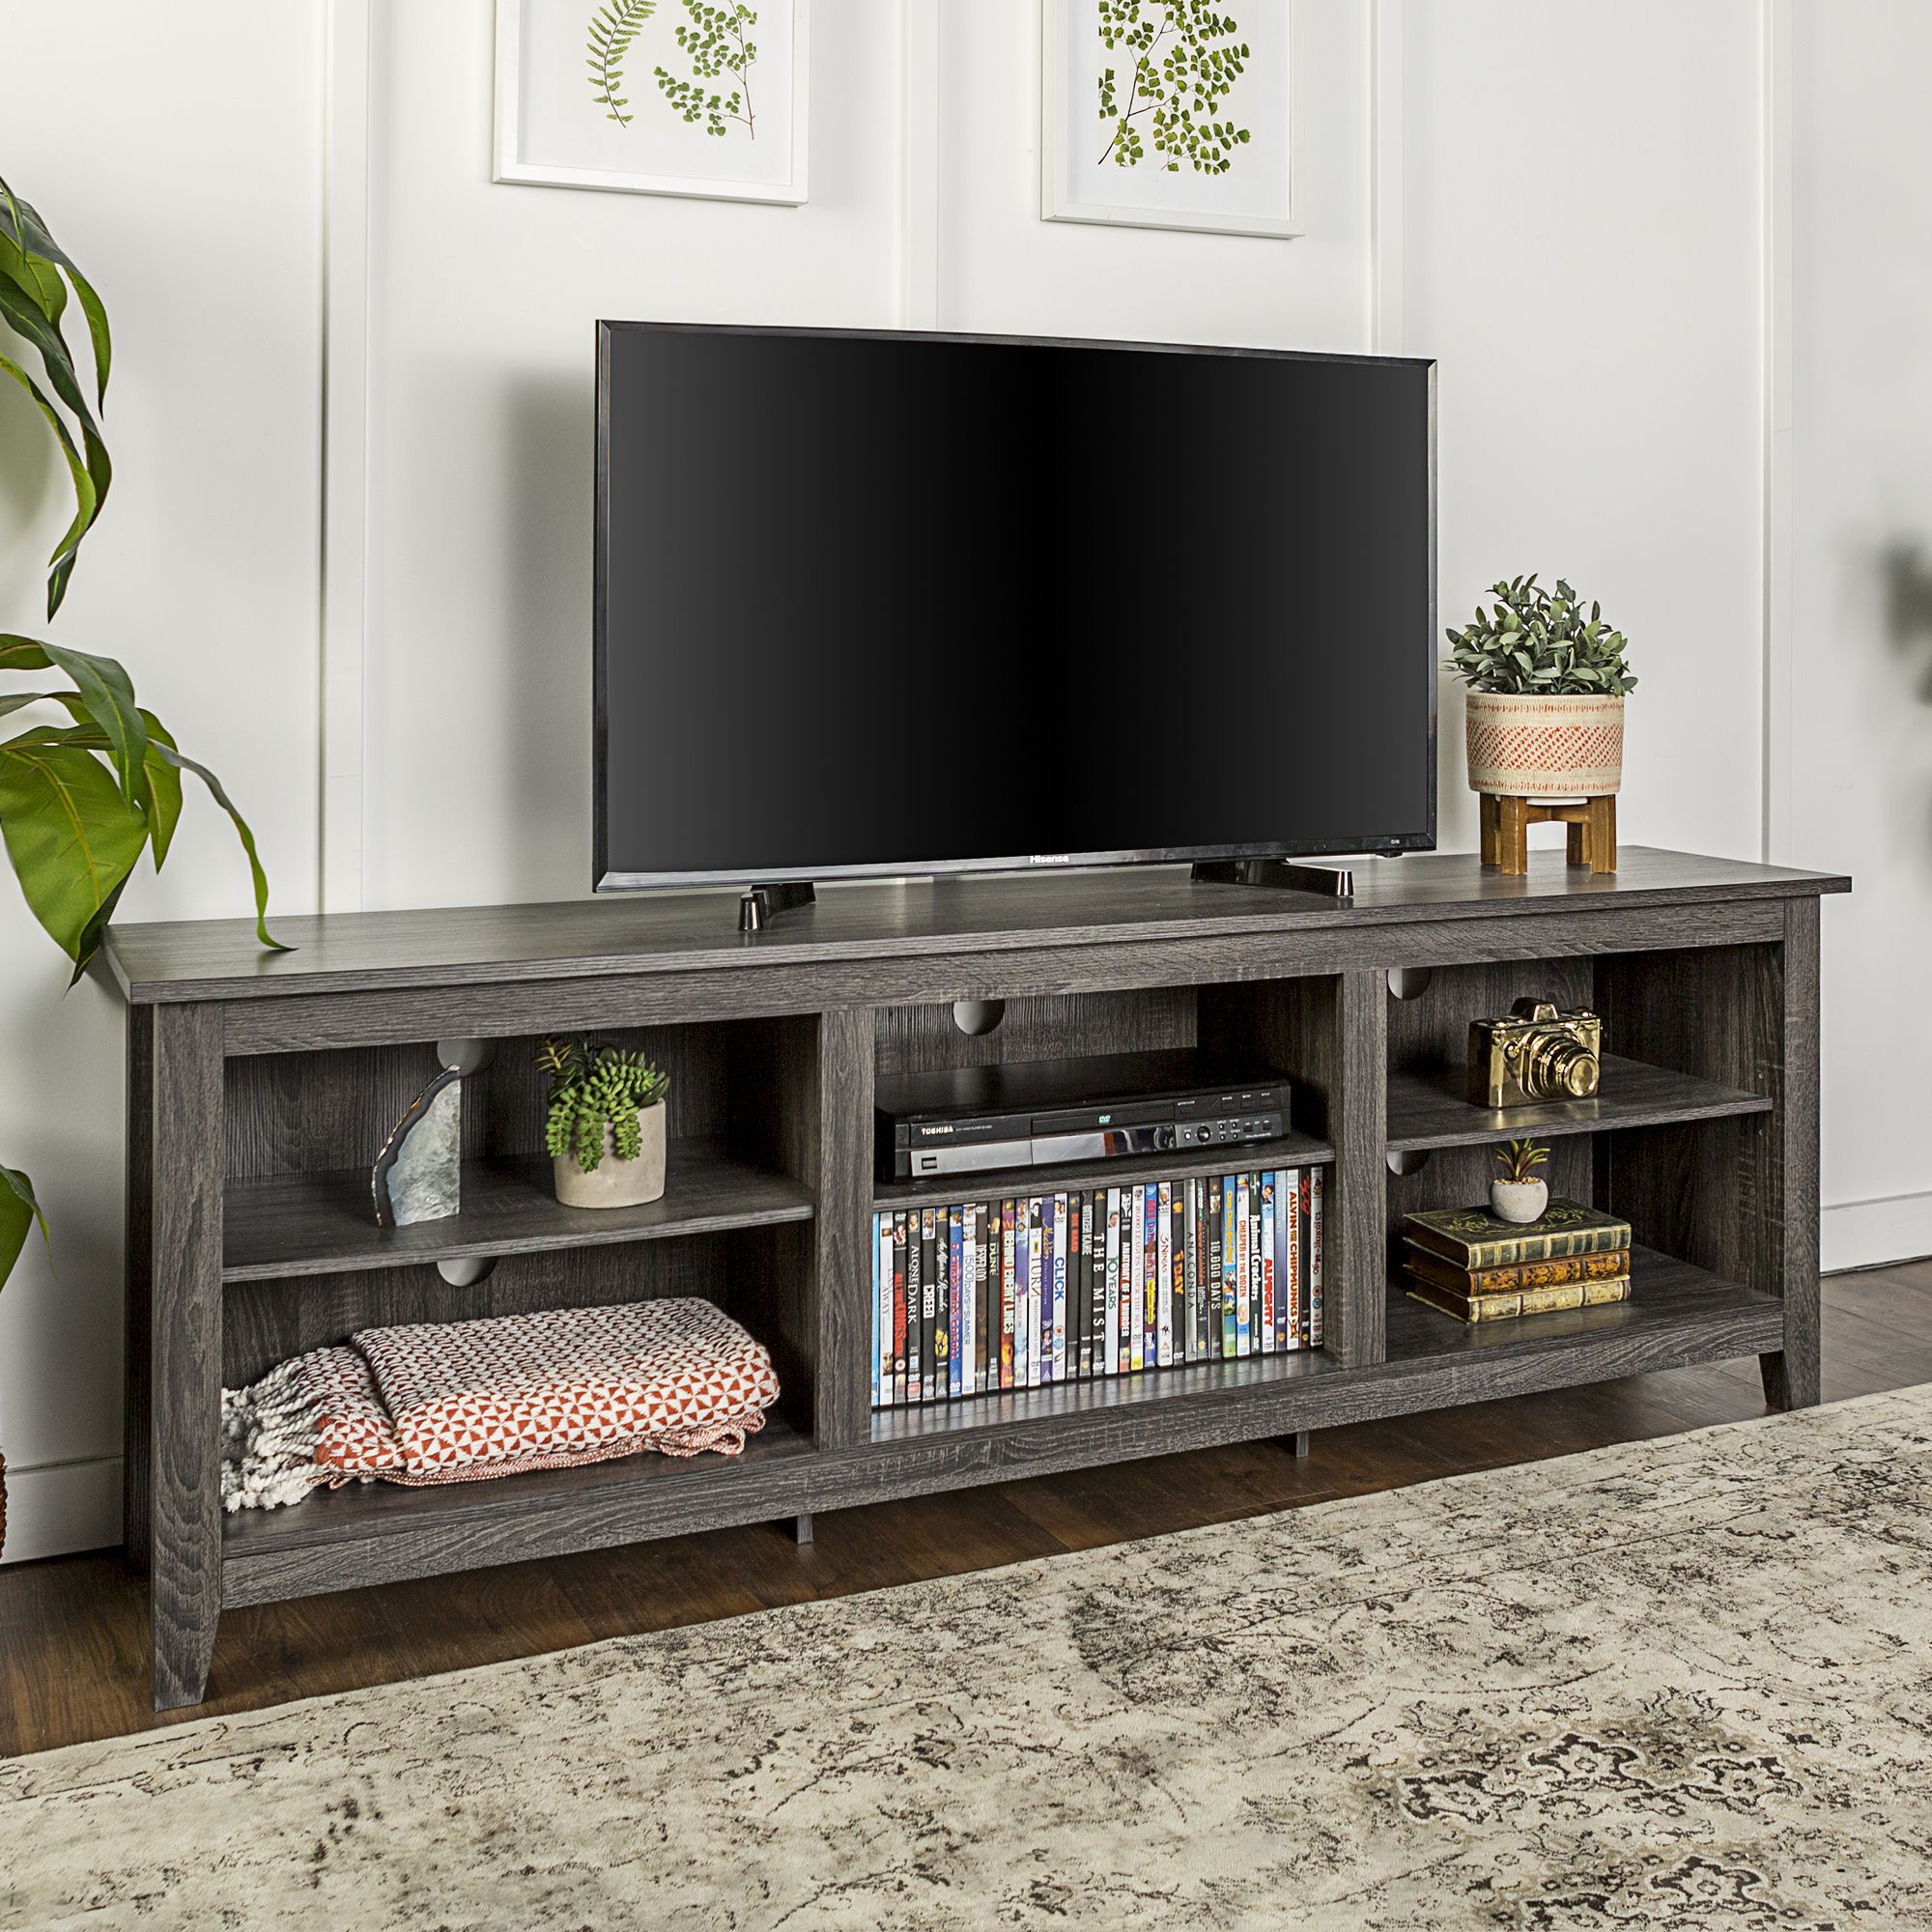 70" Wood Media Tv Stand Storage Console – Charcoal 842158106131 | Ebay Intended For 110" Tvs Wood Tv Cabinet With Drawers (Gallery 19 of 20)